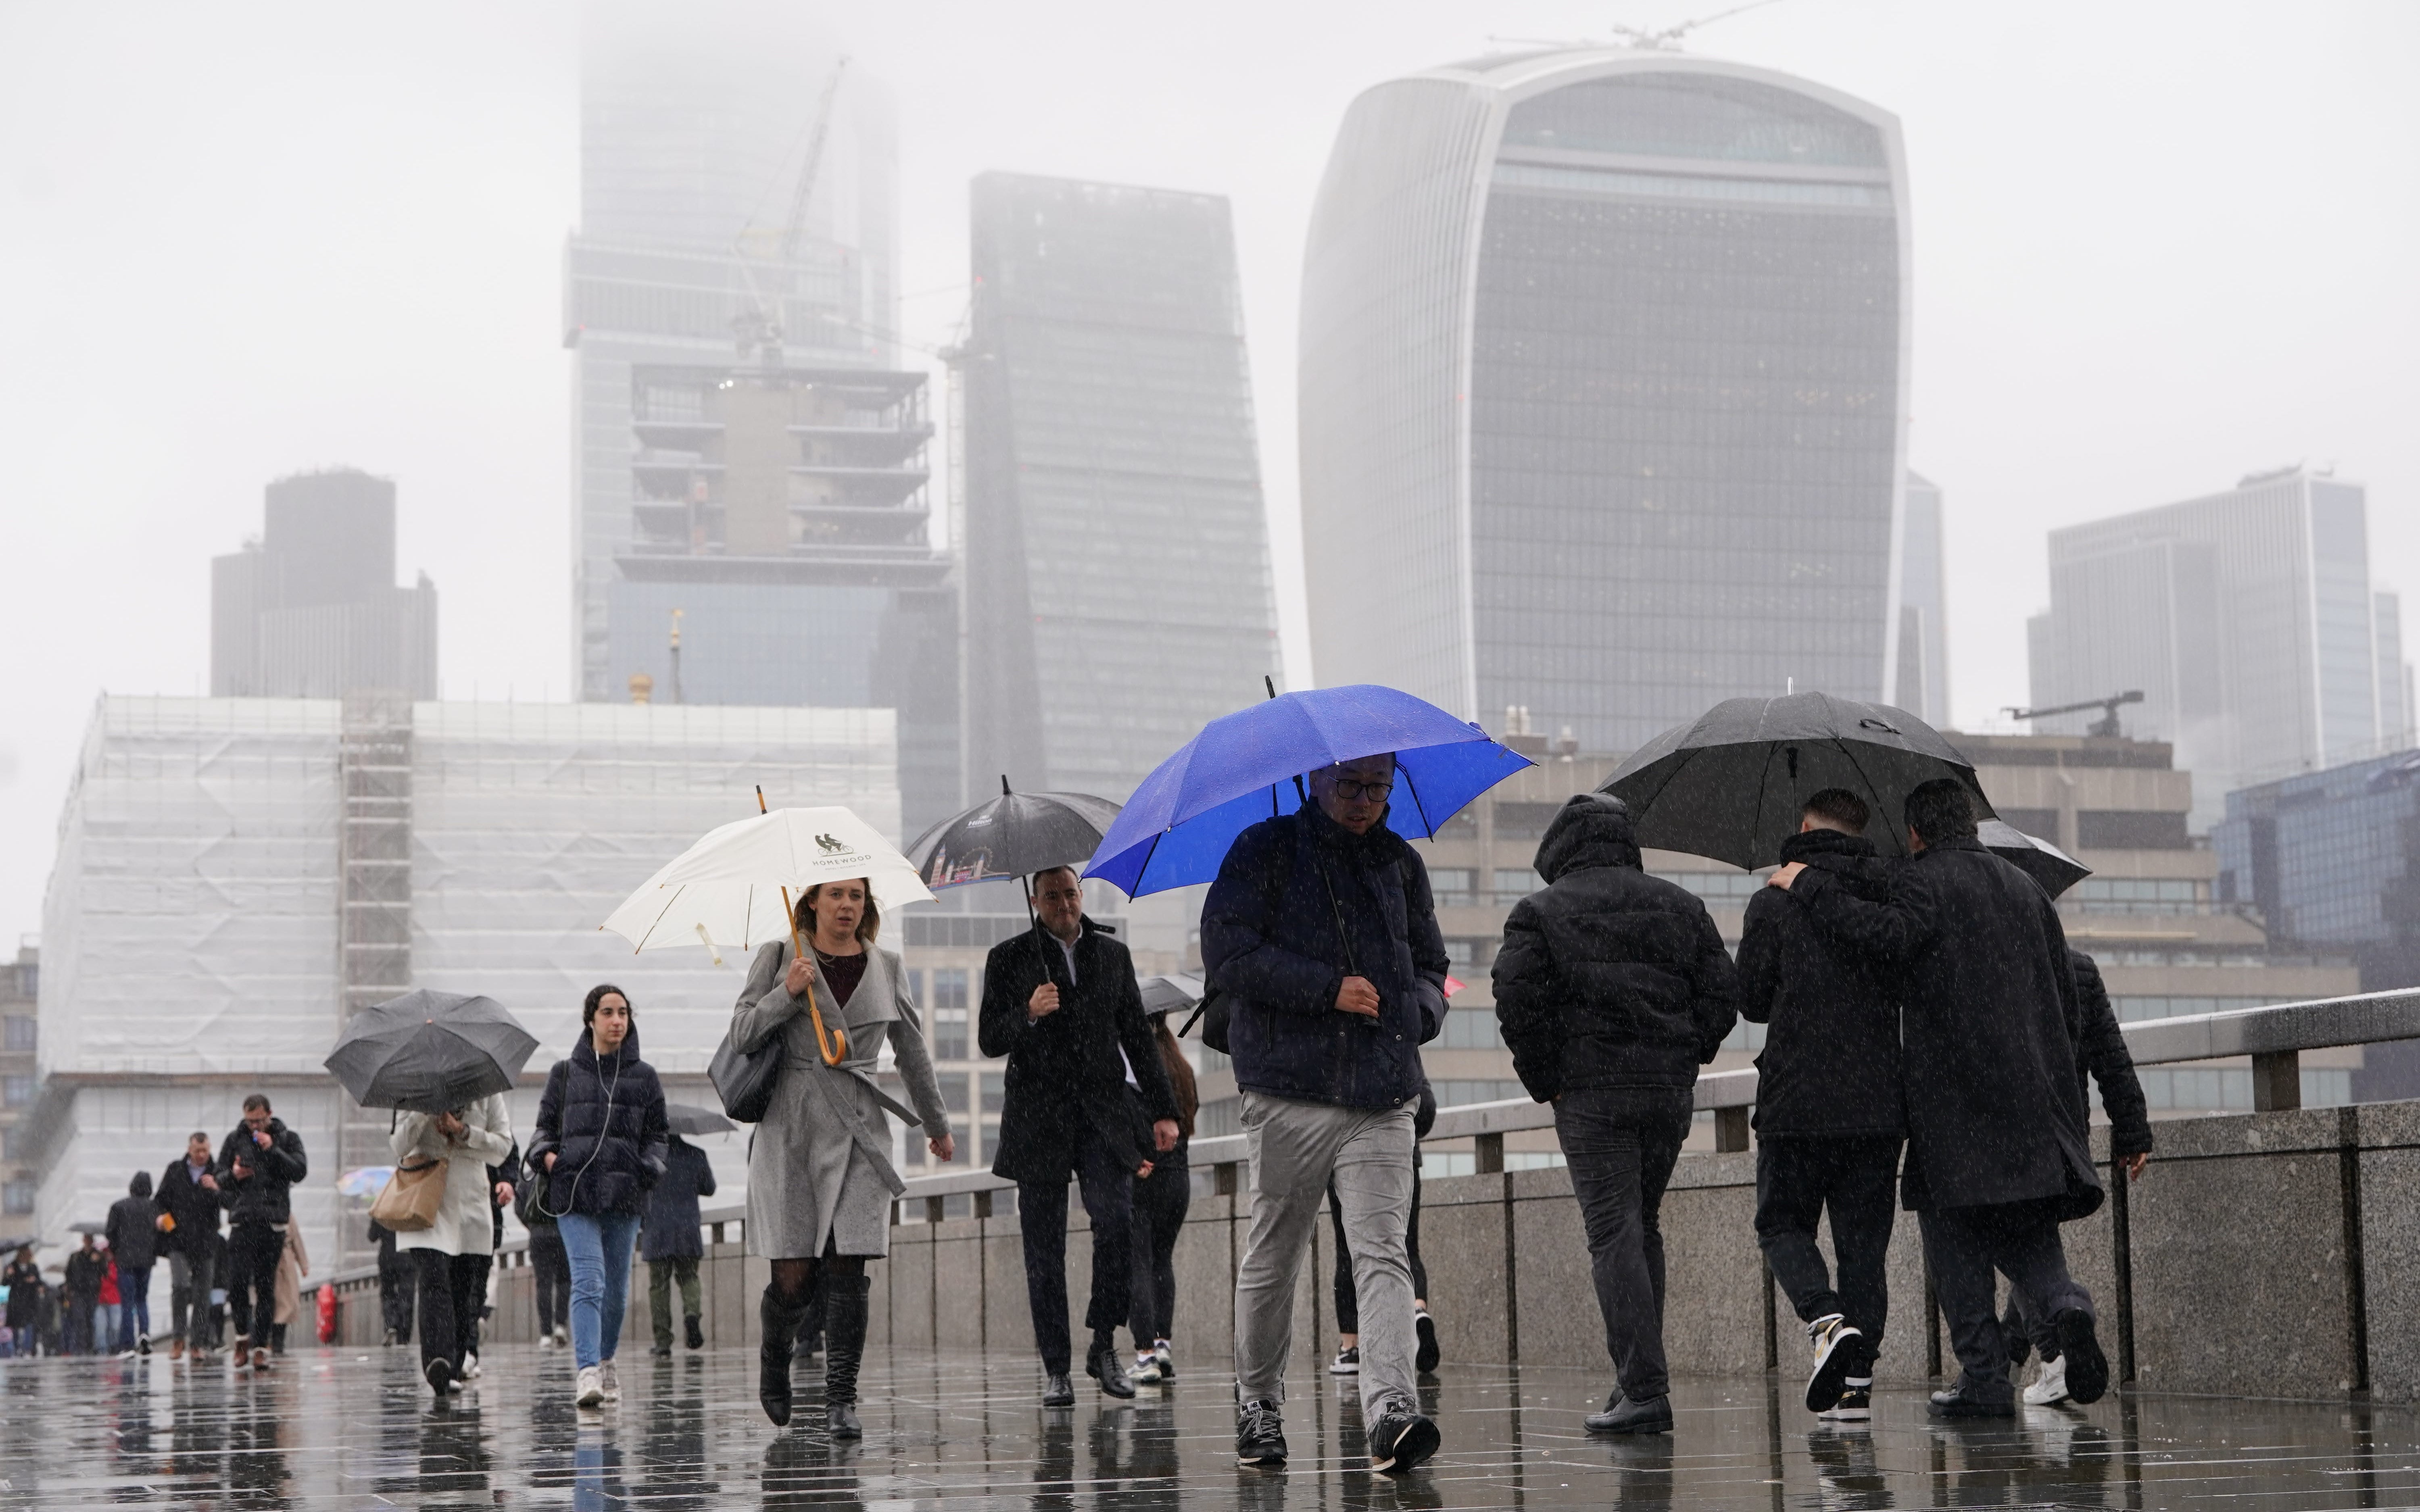 London languishes at 95th place of global cities ranking